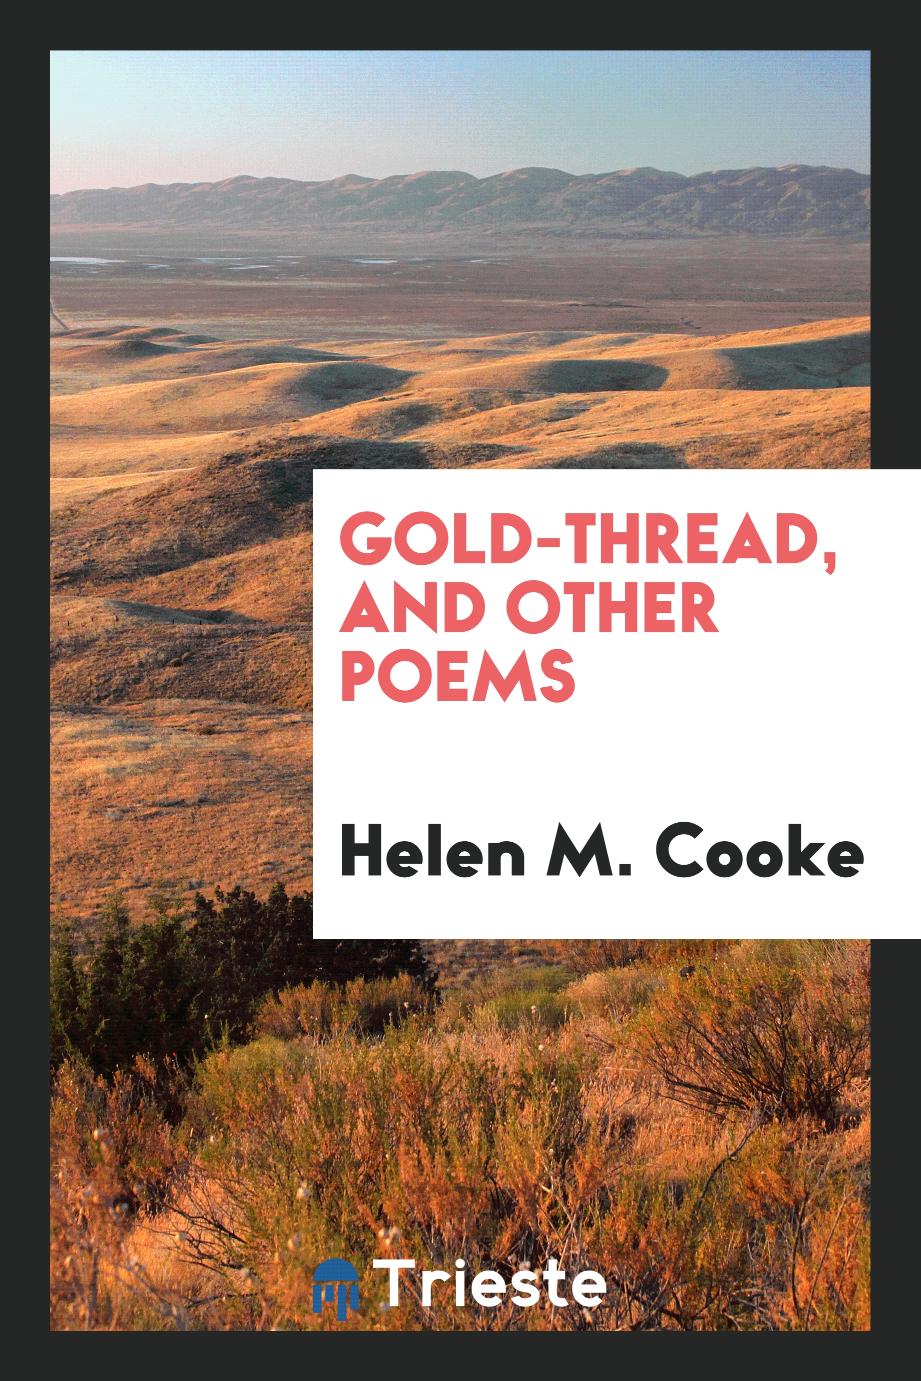 Gold-thread, and other poems